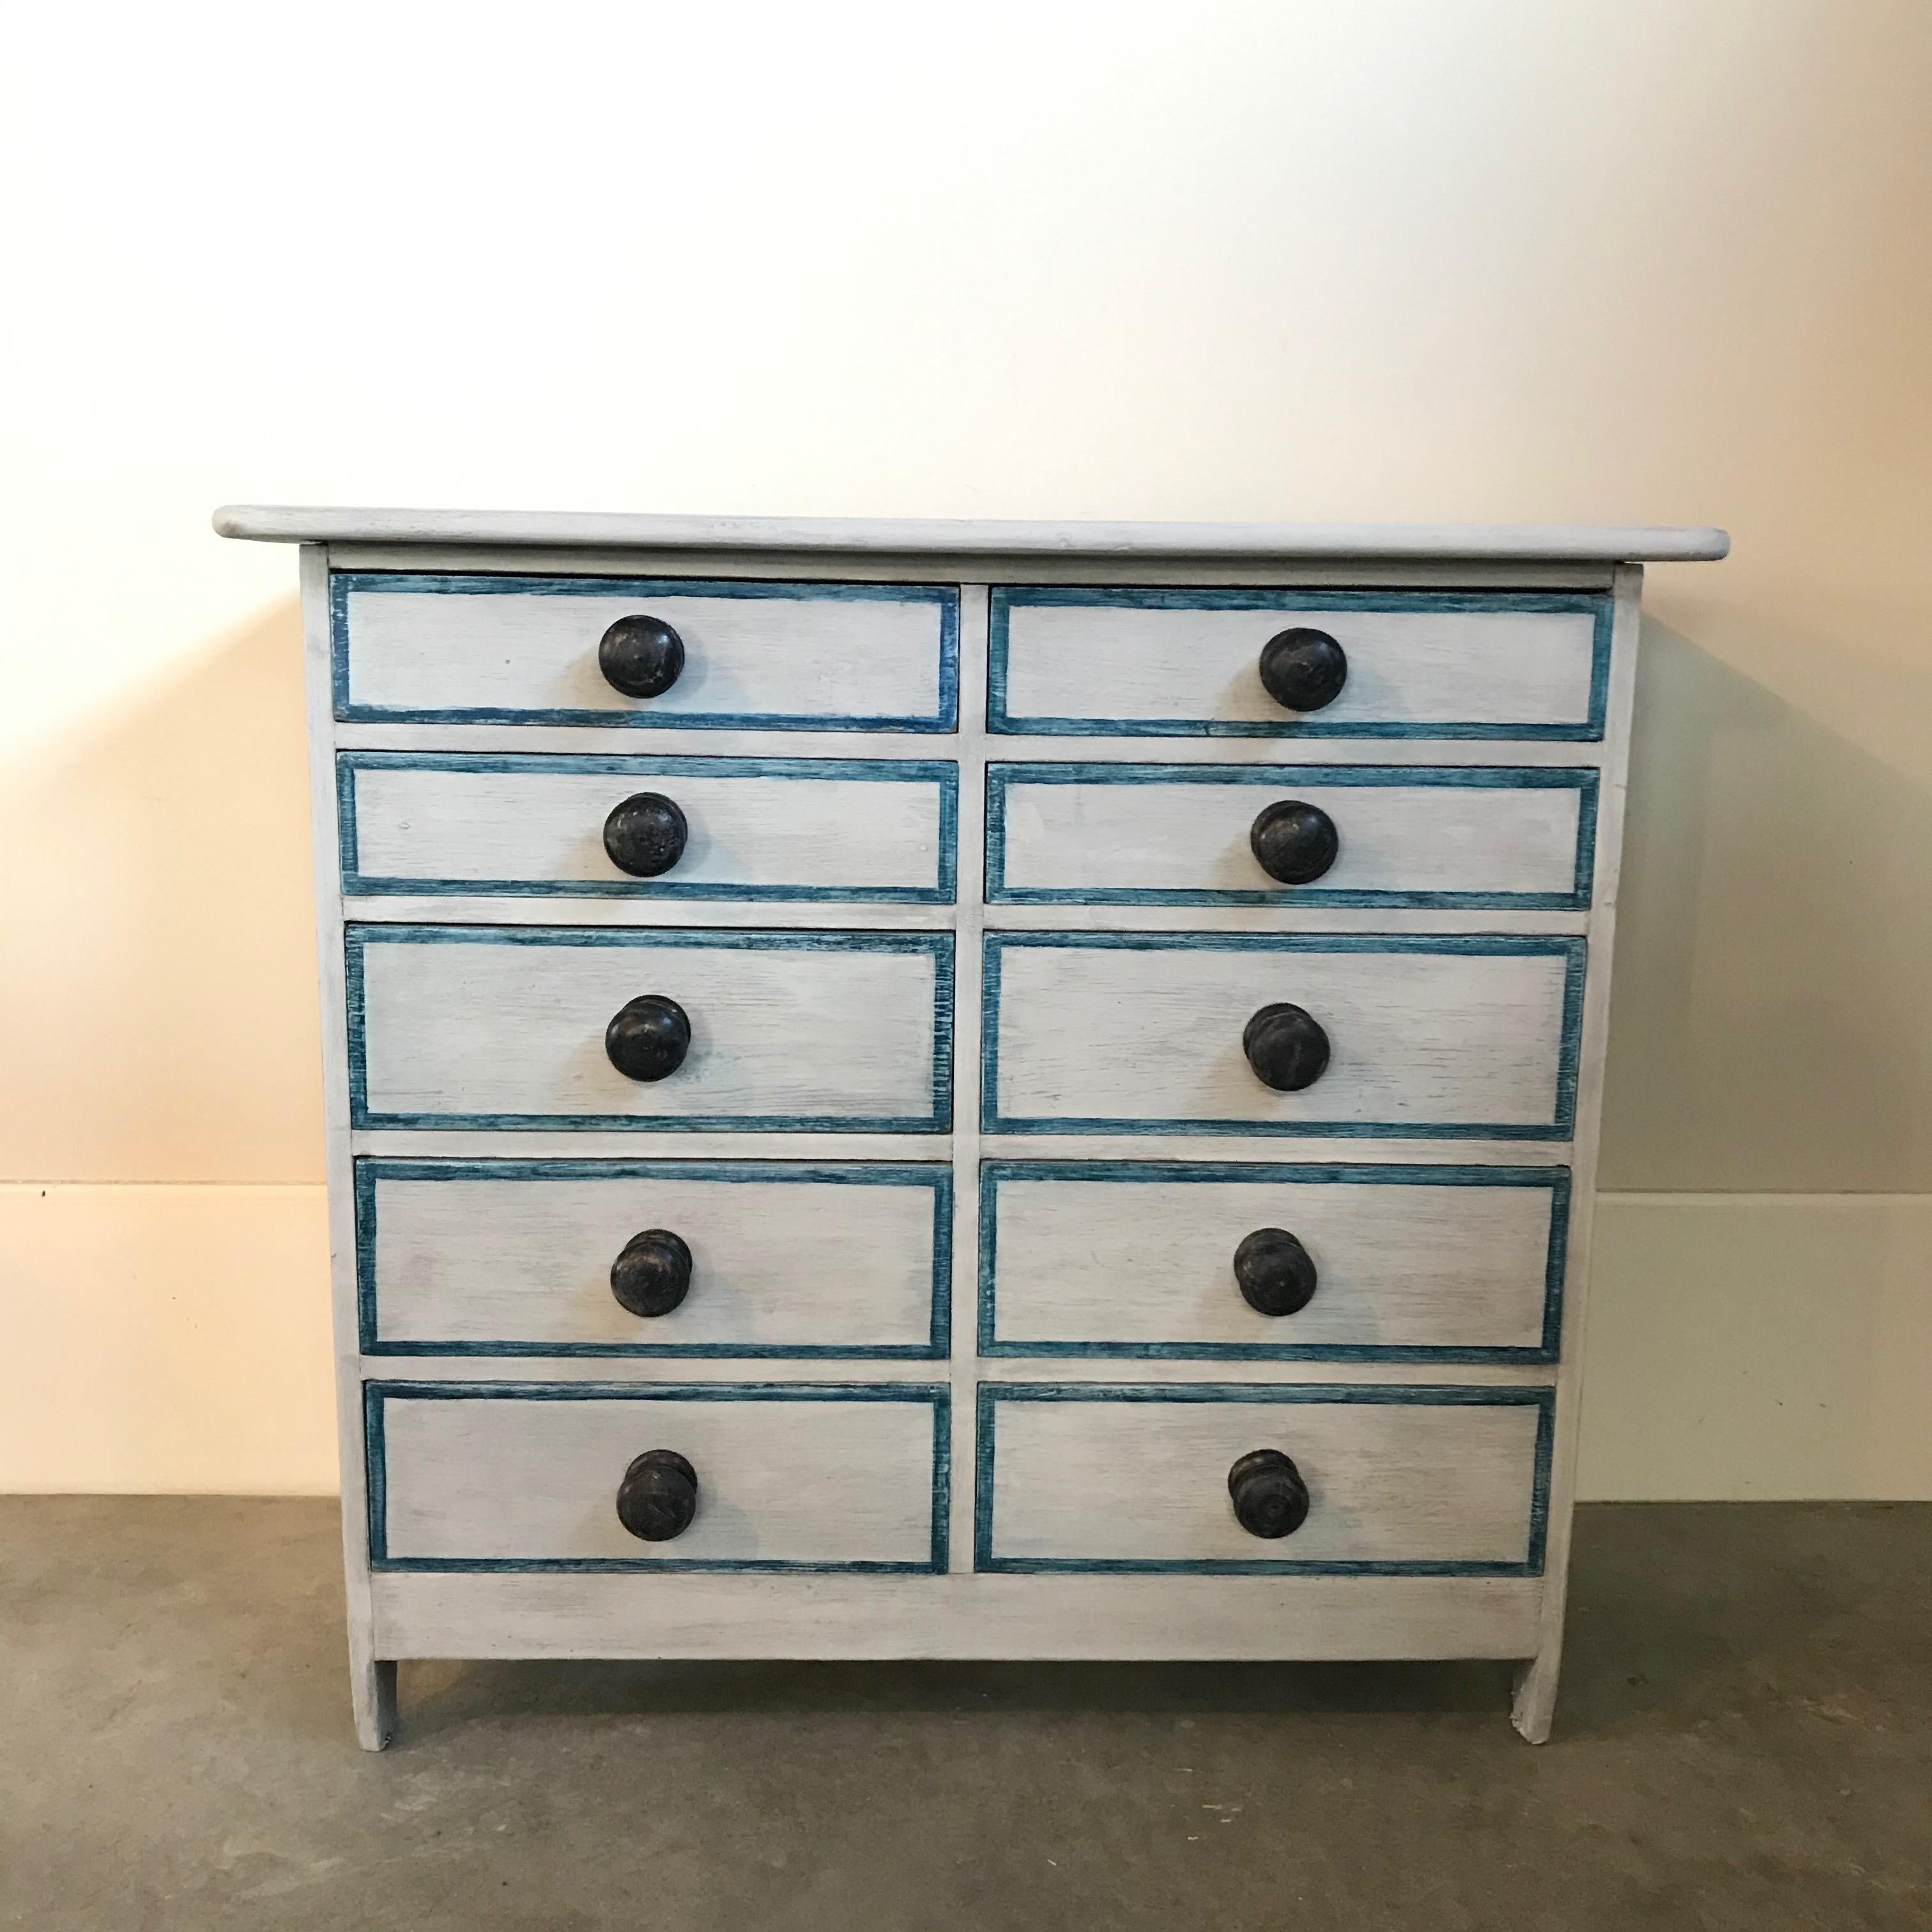 Charming Gustavian chest of drawers having 10 drawers and later paint in a soft grey and teal blue trim.
#3565.
     